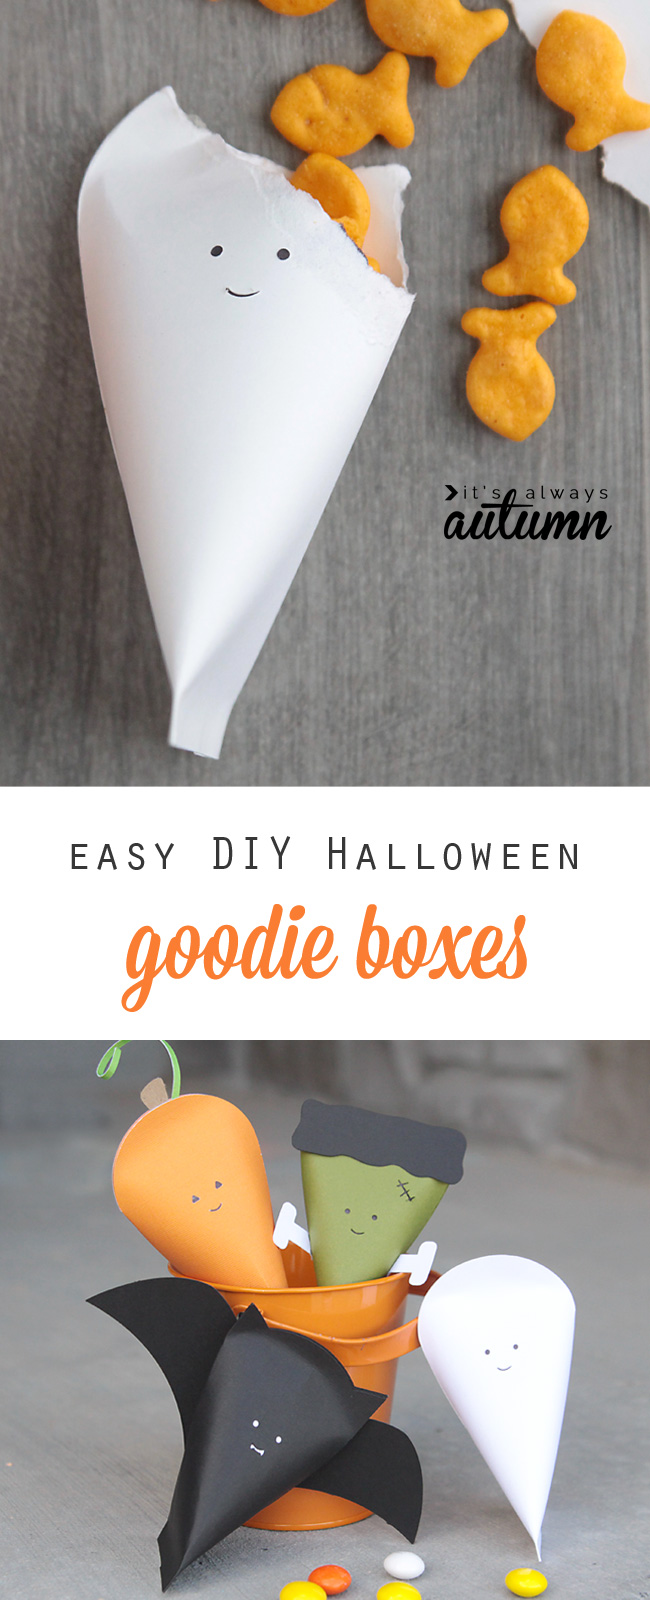 Paper Halloween goodie boxes